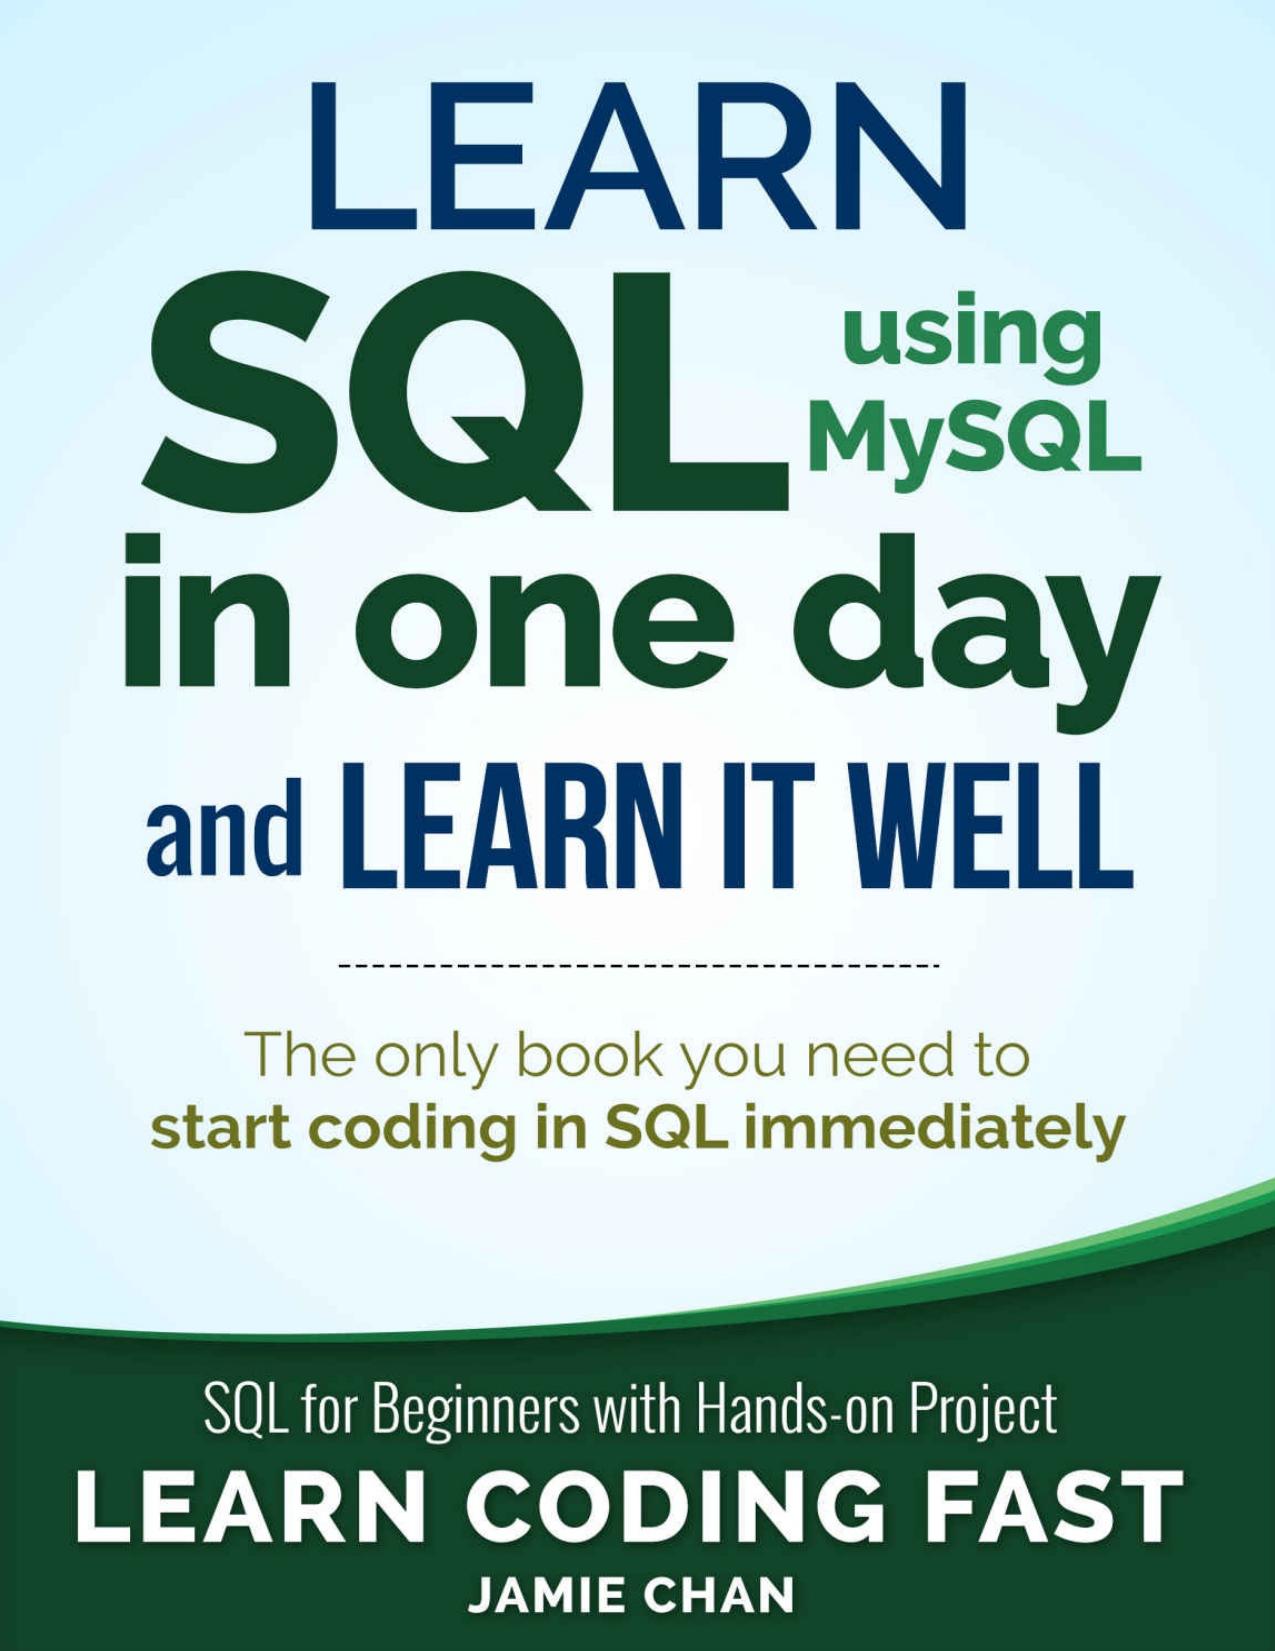 SQL: Learn SQL (using Mysql) in One Day and Learn It Well. SQL for Beginners with Hands-On Project.